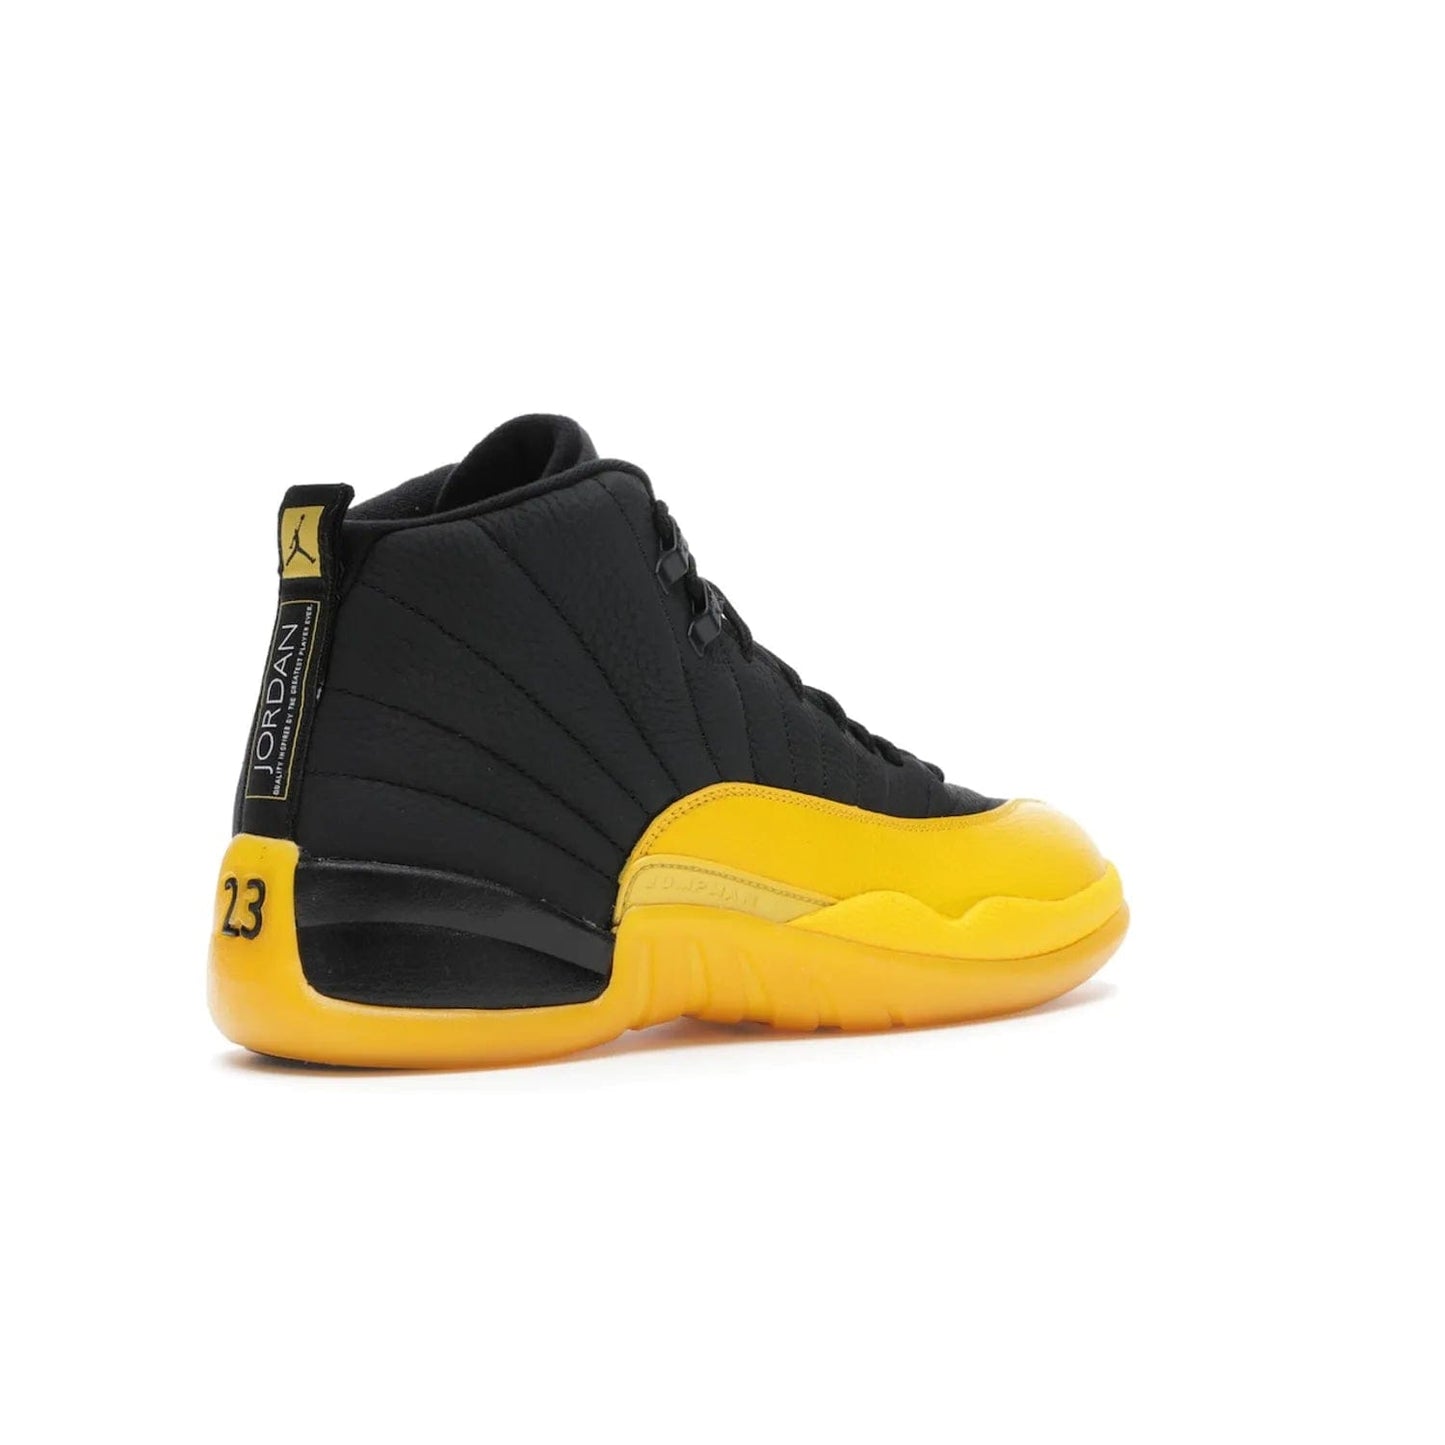 Jordan 12 Retro Black University Gold - Image 33 - Only at www.BallersClubKickz.com - This Jordan 12 Retro features a black tumbled leather upper and University Gold accents for a modern twist. Boasting Jordan "Two Three" branding and a yellow sole, these shoes will elevate your wardrobe. Fresh, sleek, and one of a kind - the Jordan 12 University Gold is your summer sneaker.